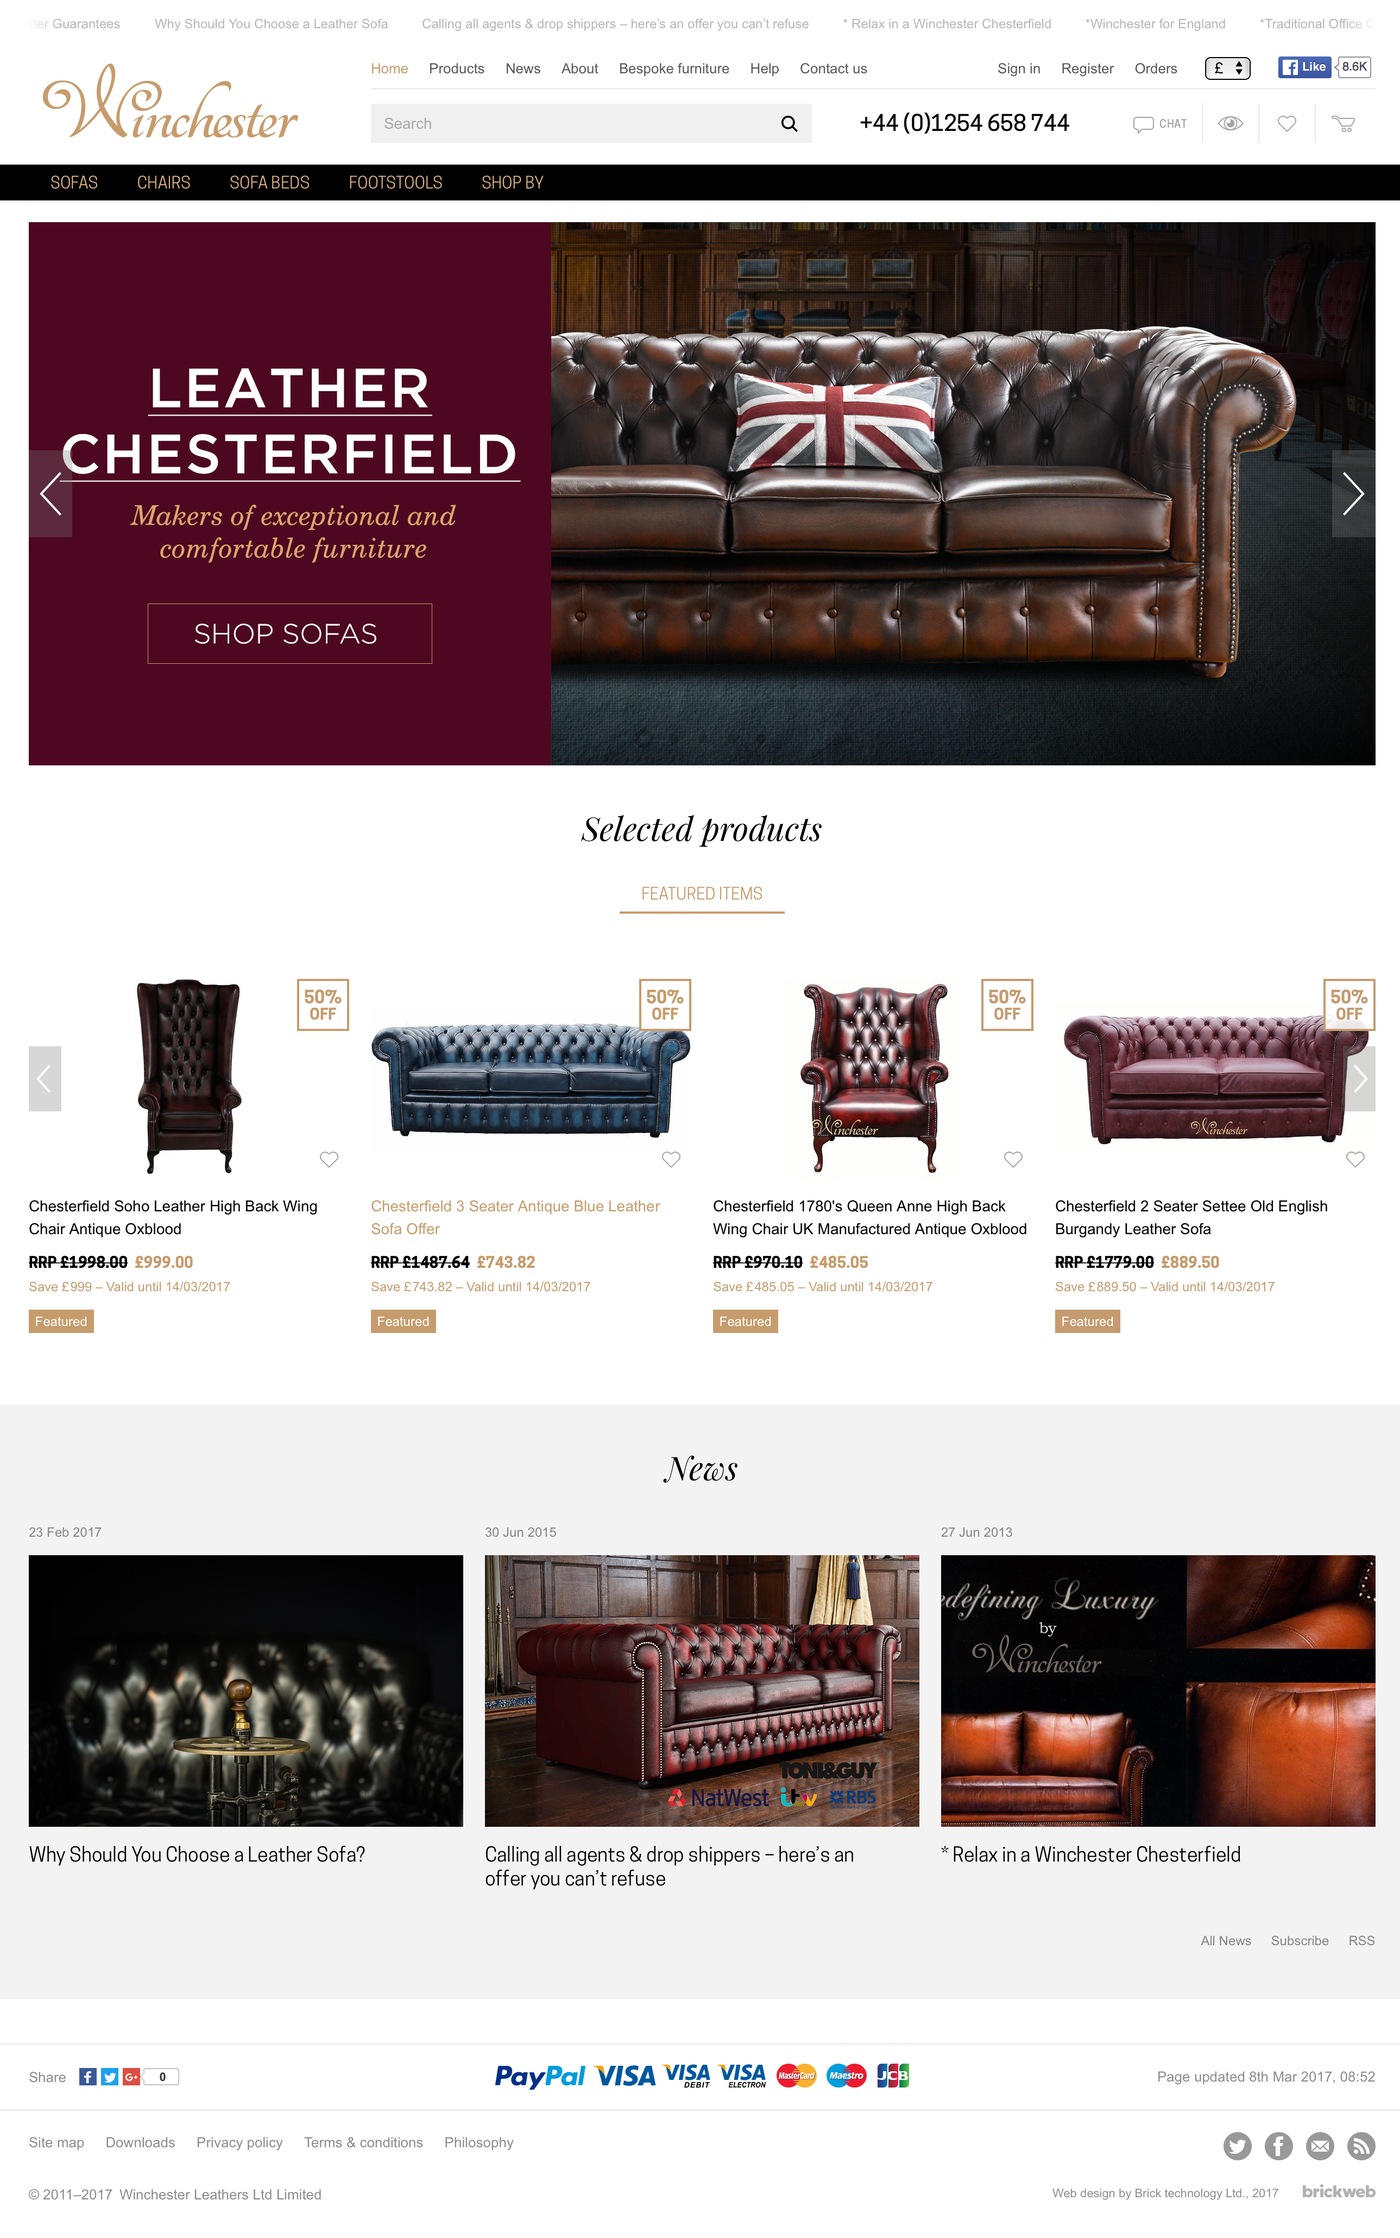 Winchester Leathers Home page